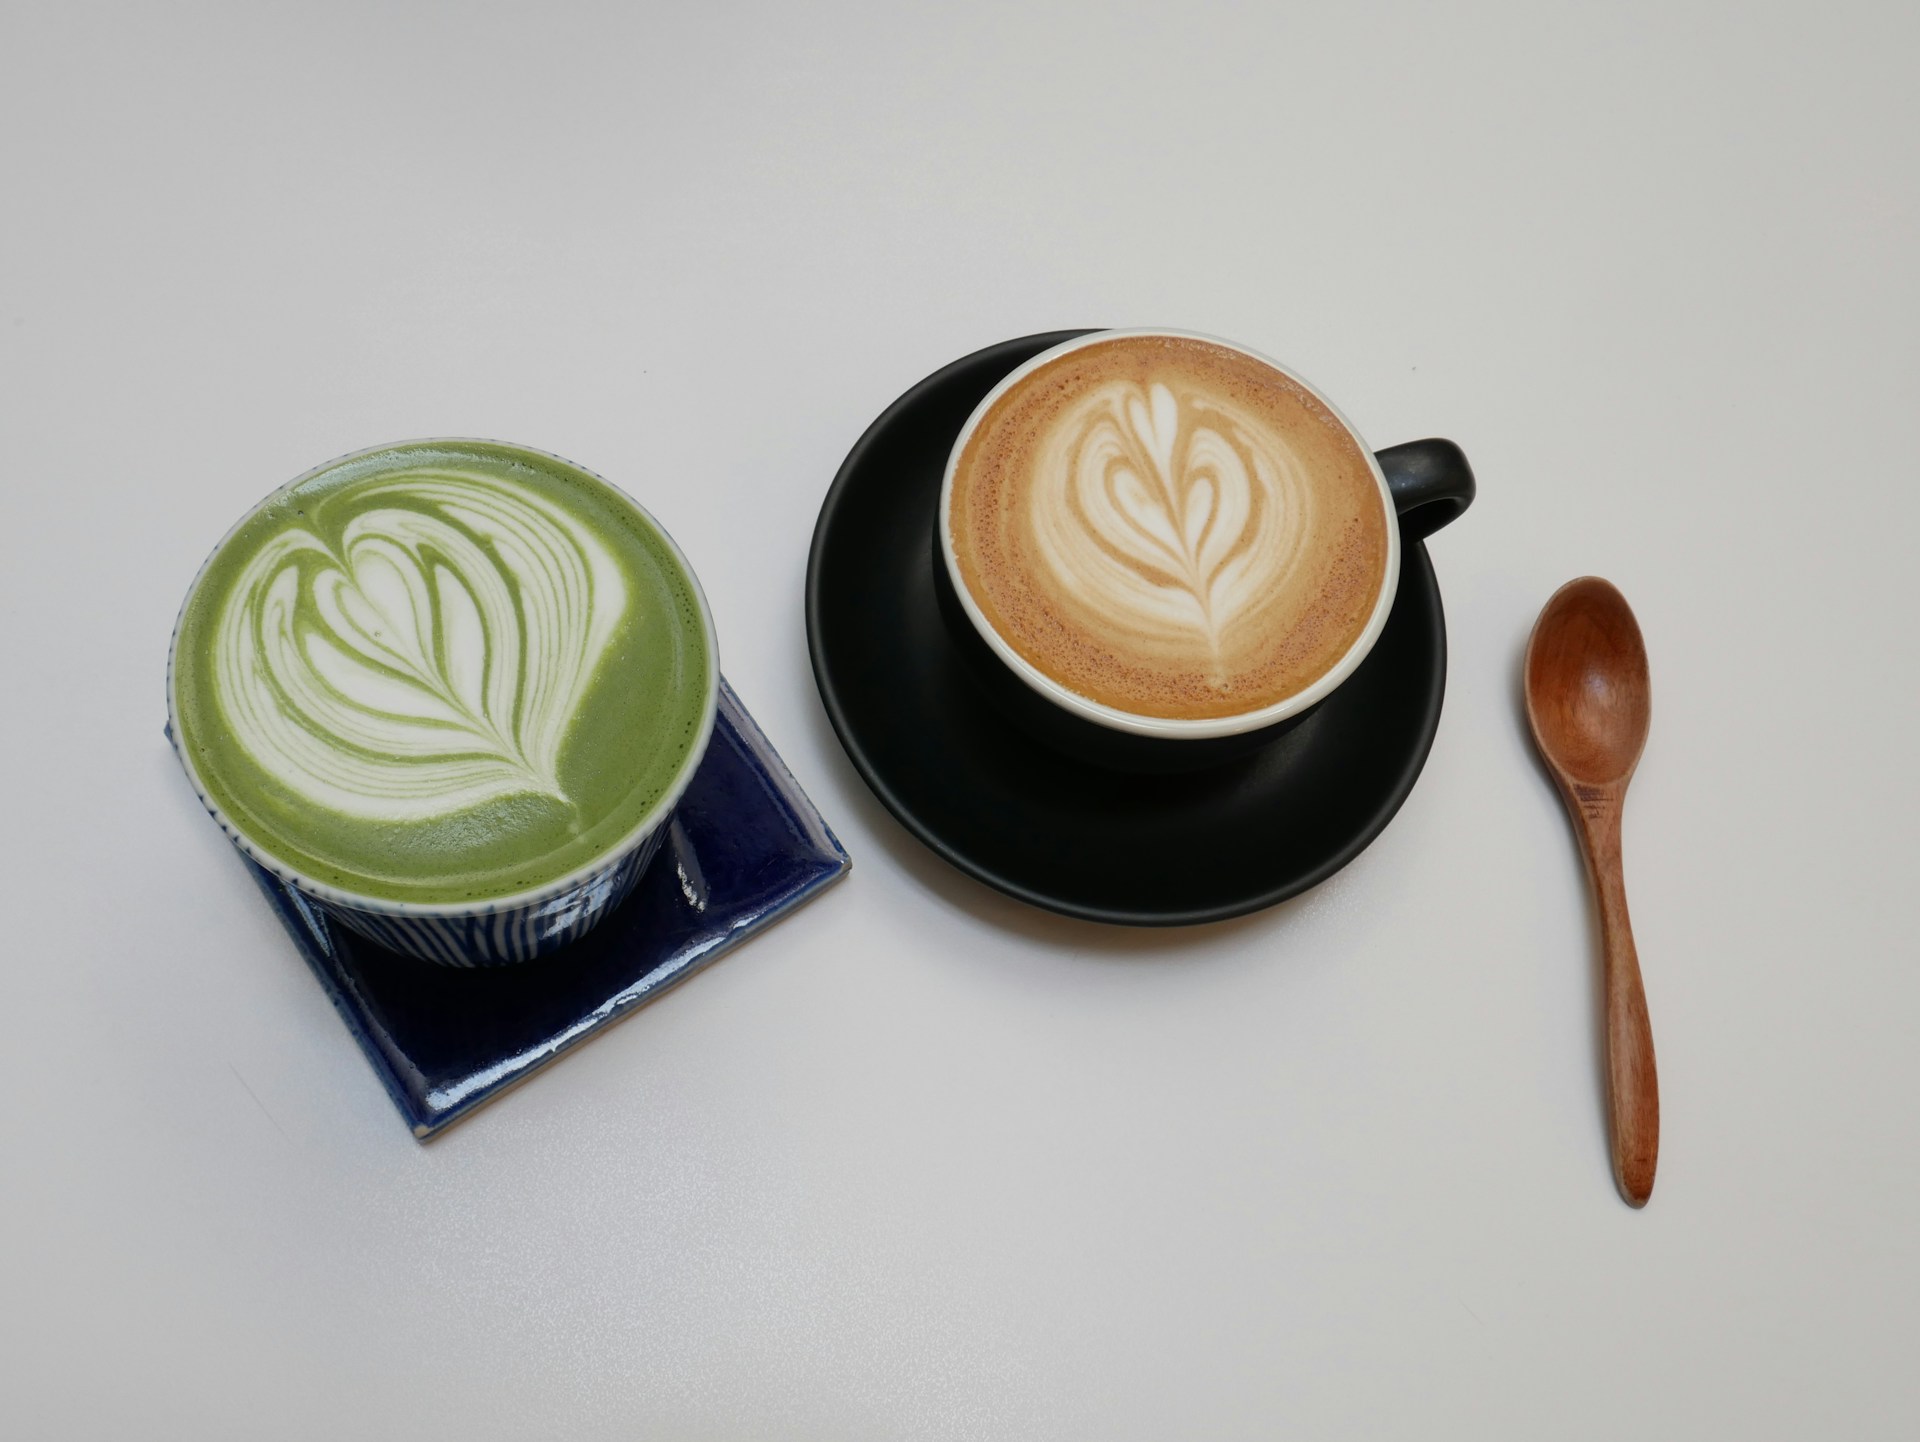 A cup of matcha and coffee